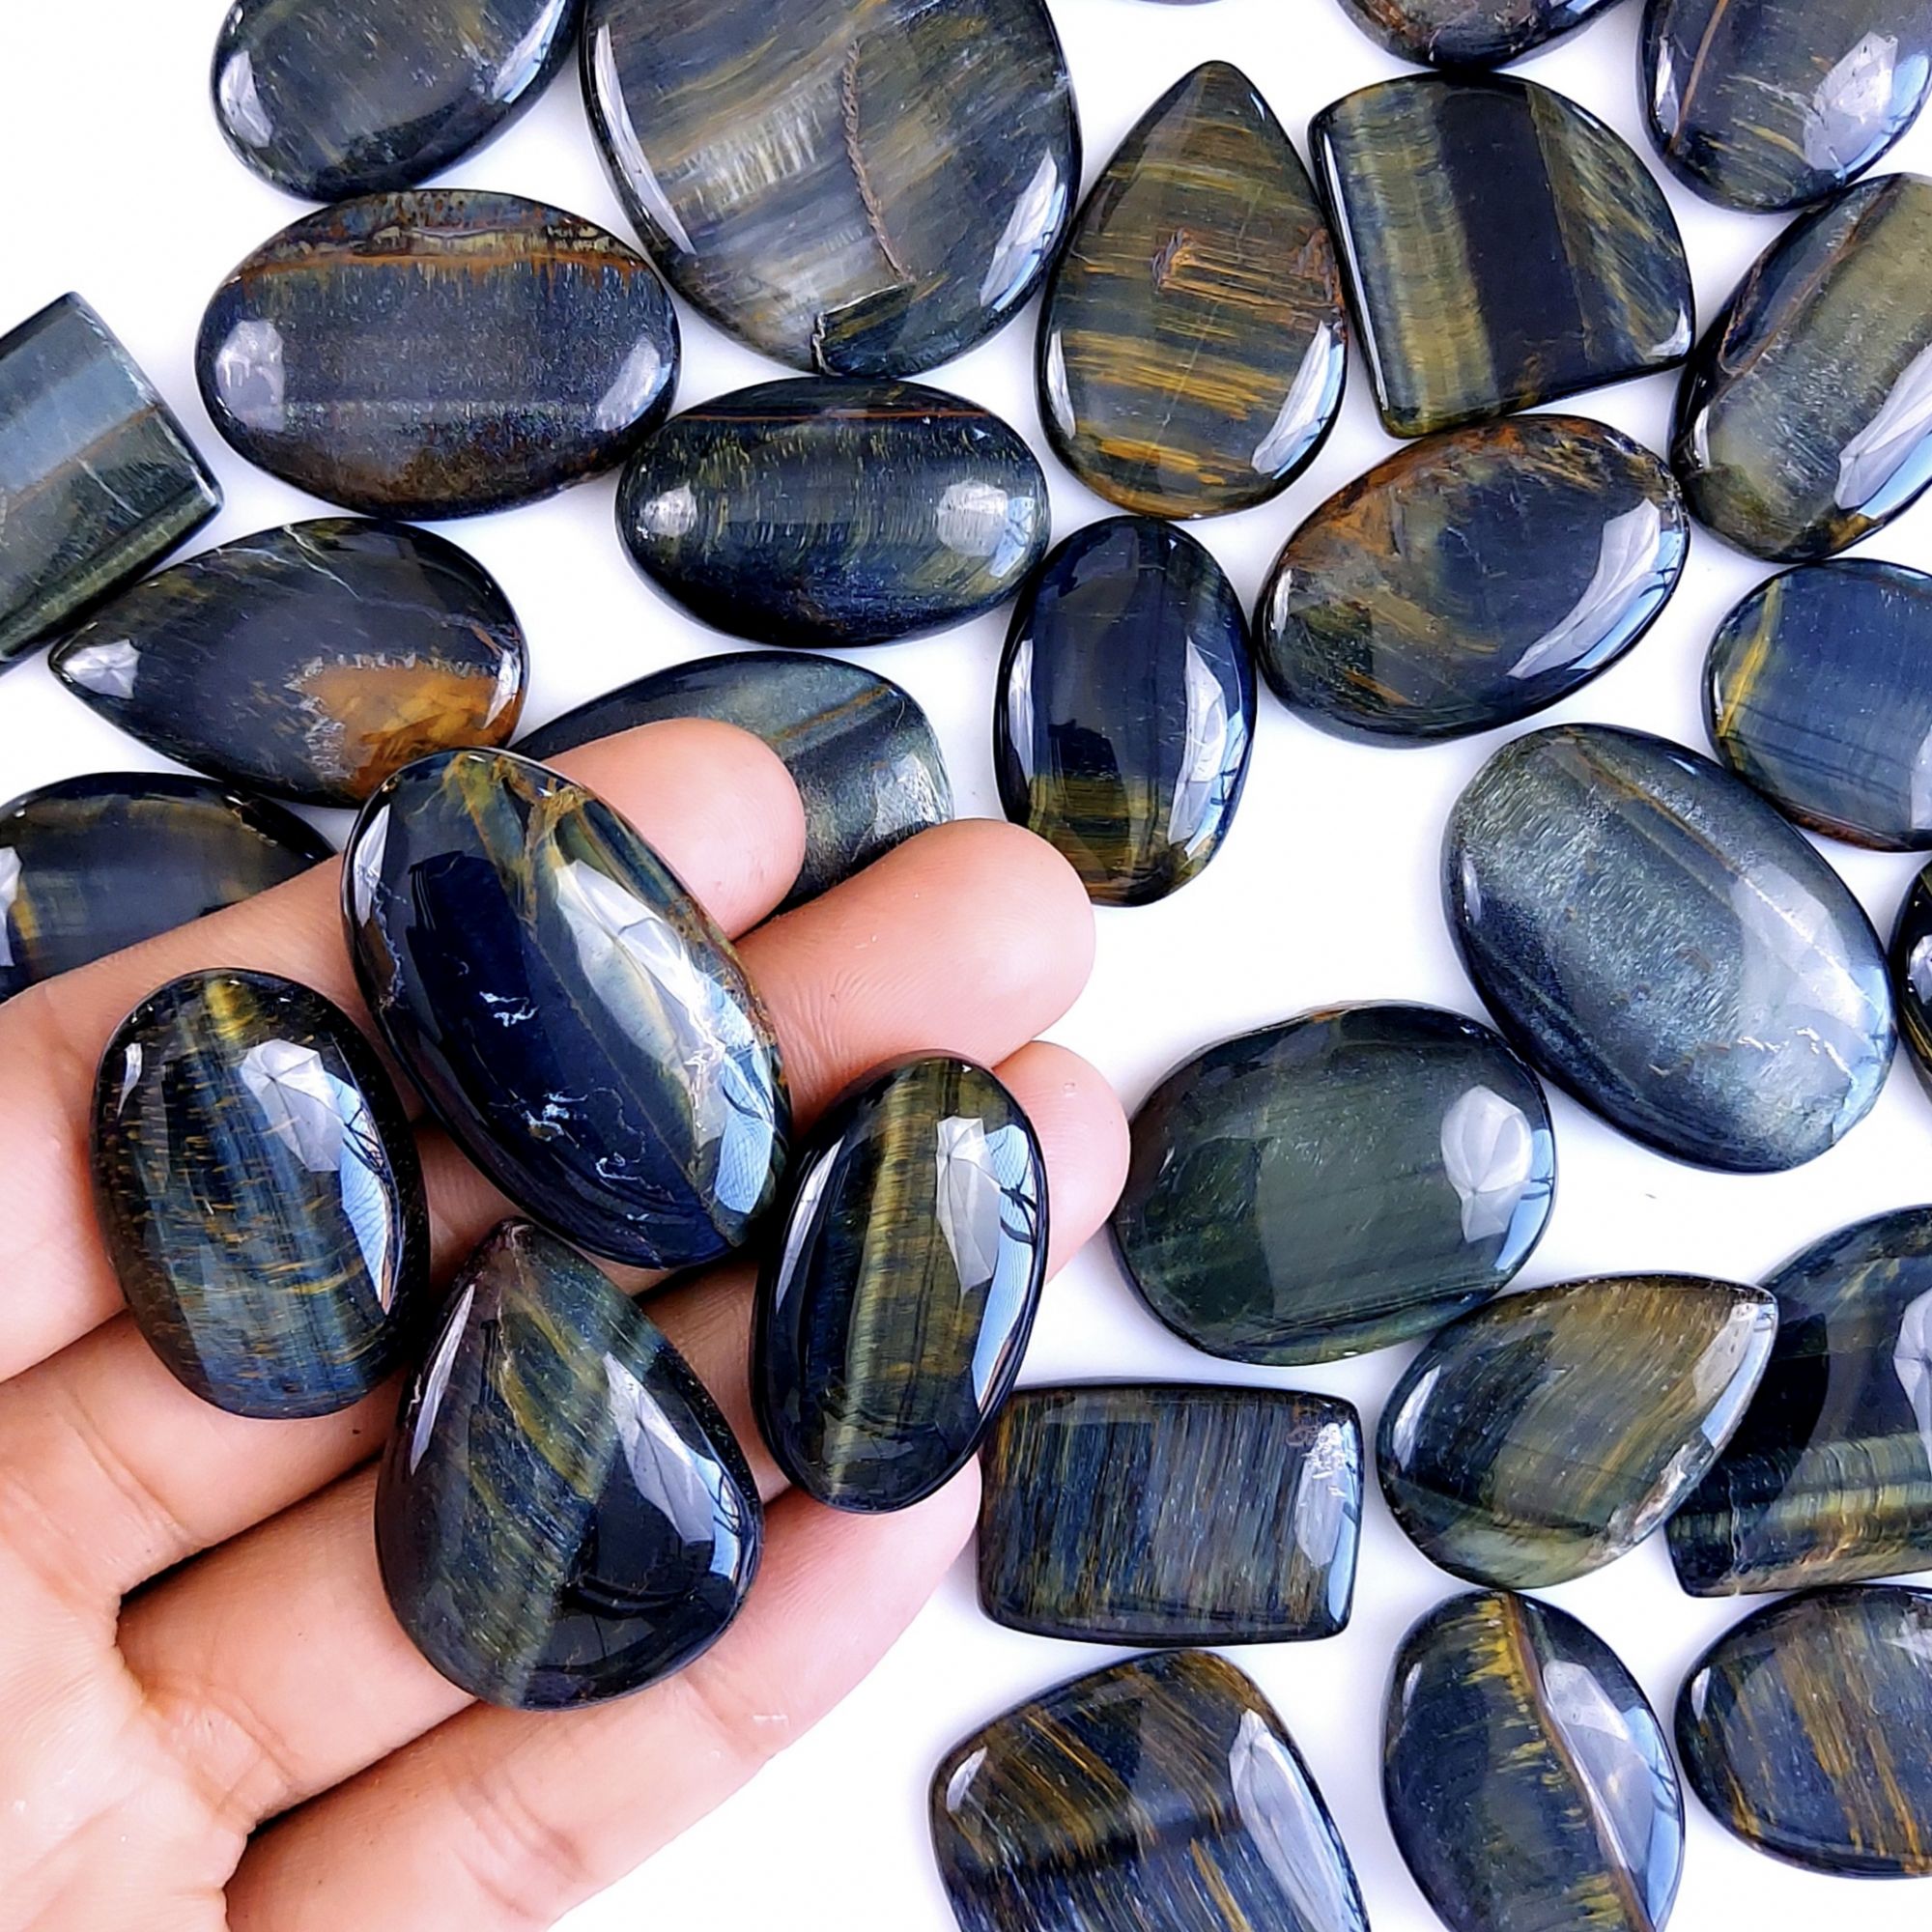 34Pcs 1225Cts Natural Tiger Eye Loose Cabochon Gemstone Lot Mix Shape and and Size for Jewelry Making 40x40 24x20mm#34Pcs 1225Cts Natural Tiger Eye Loose Cabochon Gemstone Lot Mix Shape and and Size for Jewelry Making 40x40 24x20mm#1308